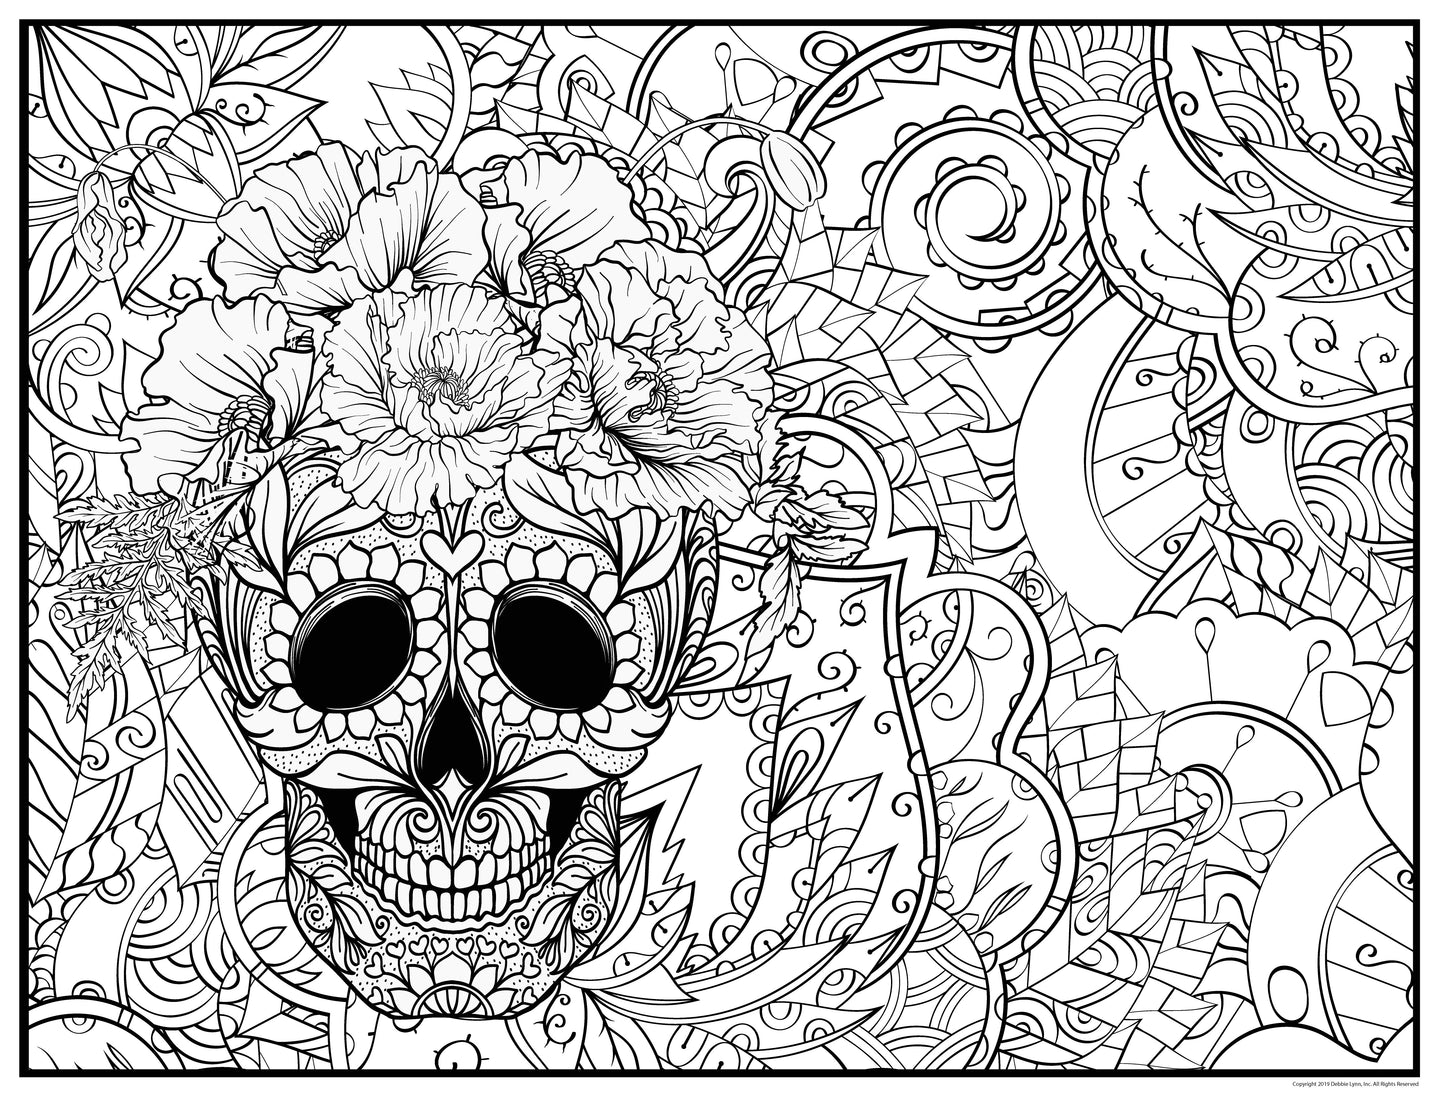 Sugar Skull Personalized Giant Coloring Poster 46"x60"